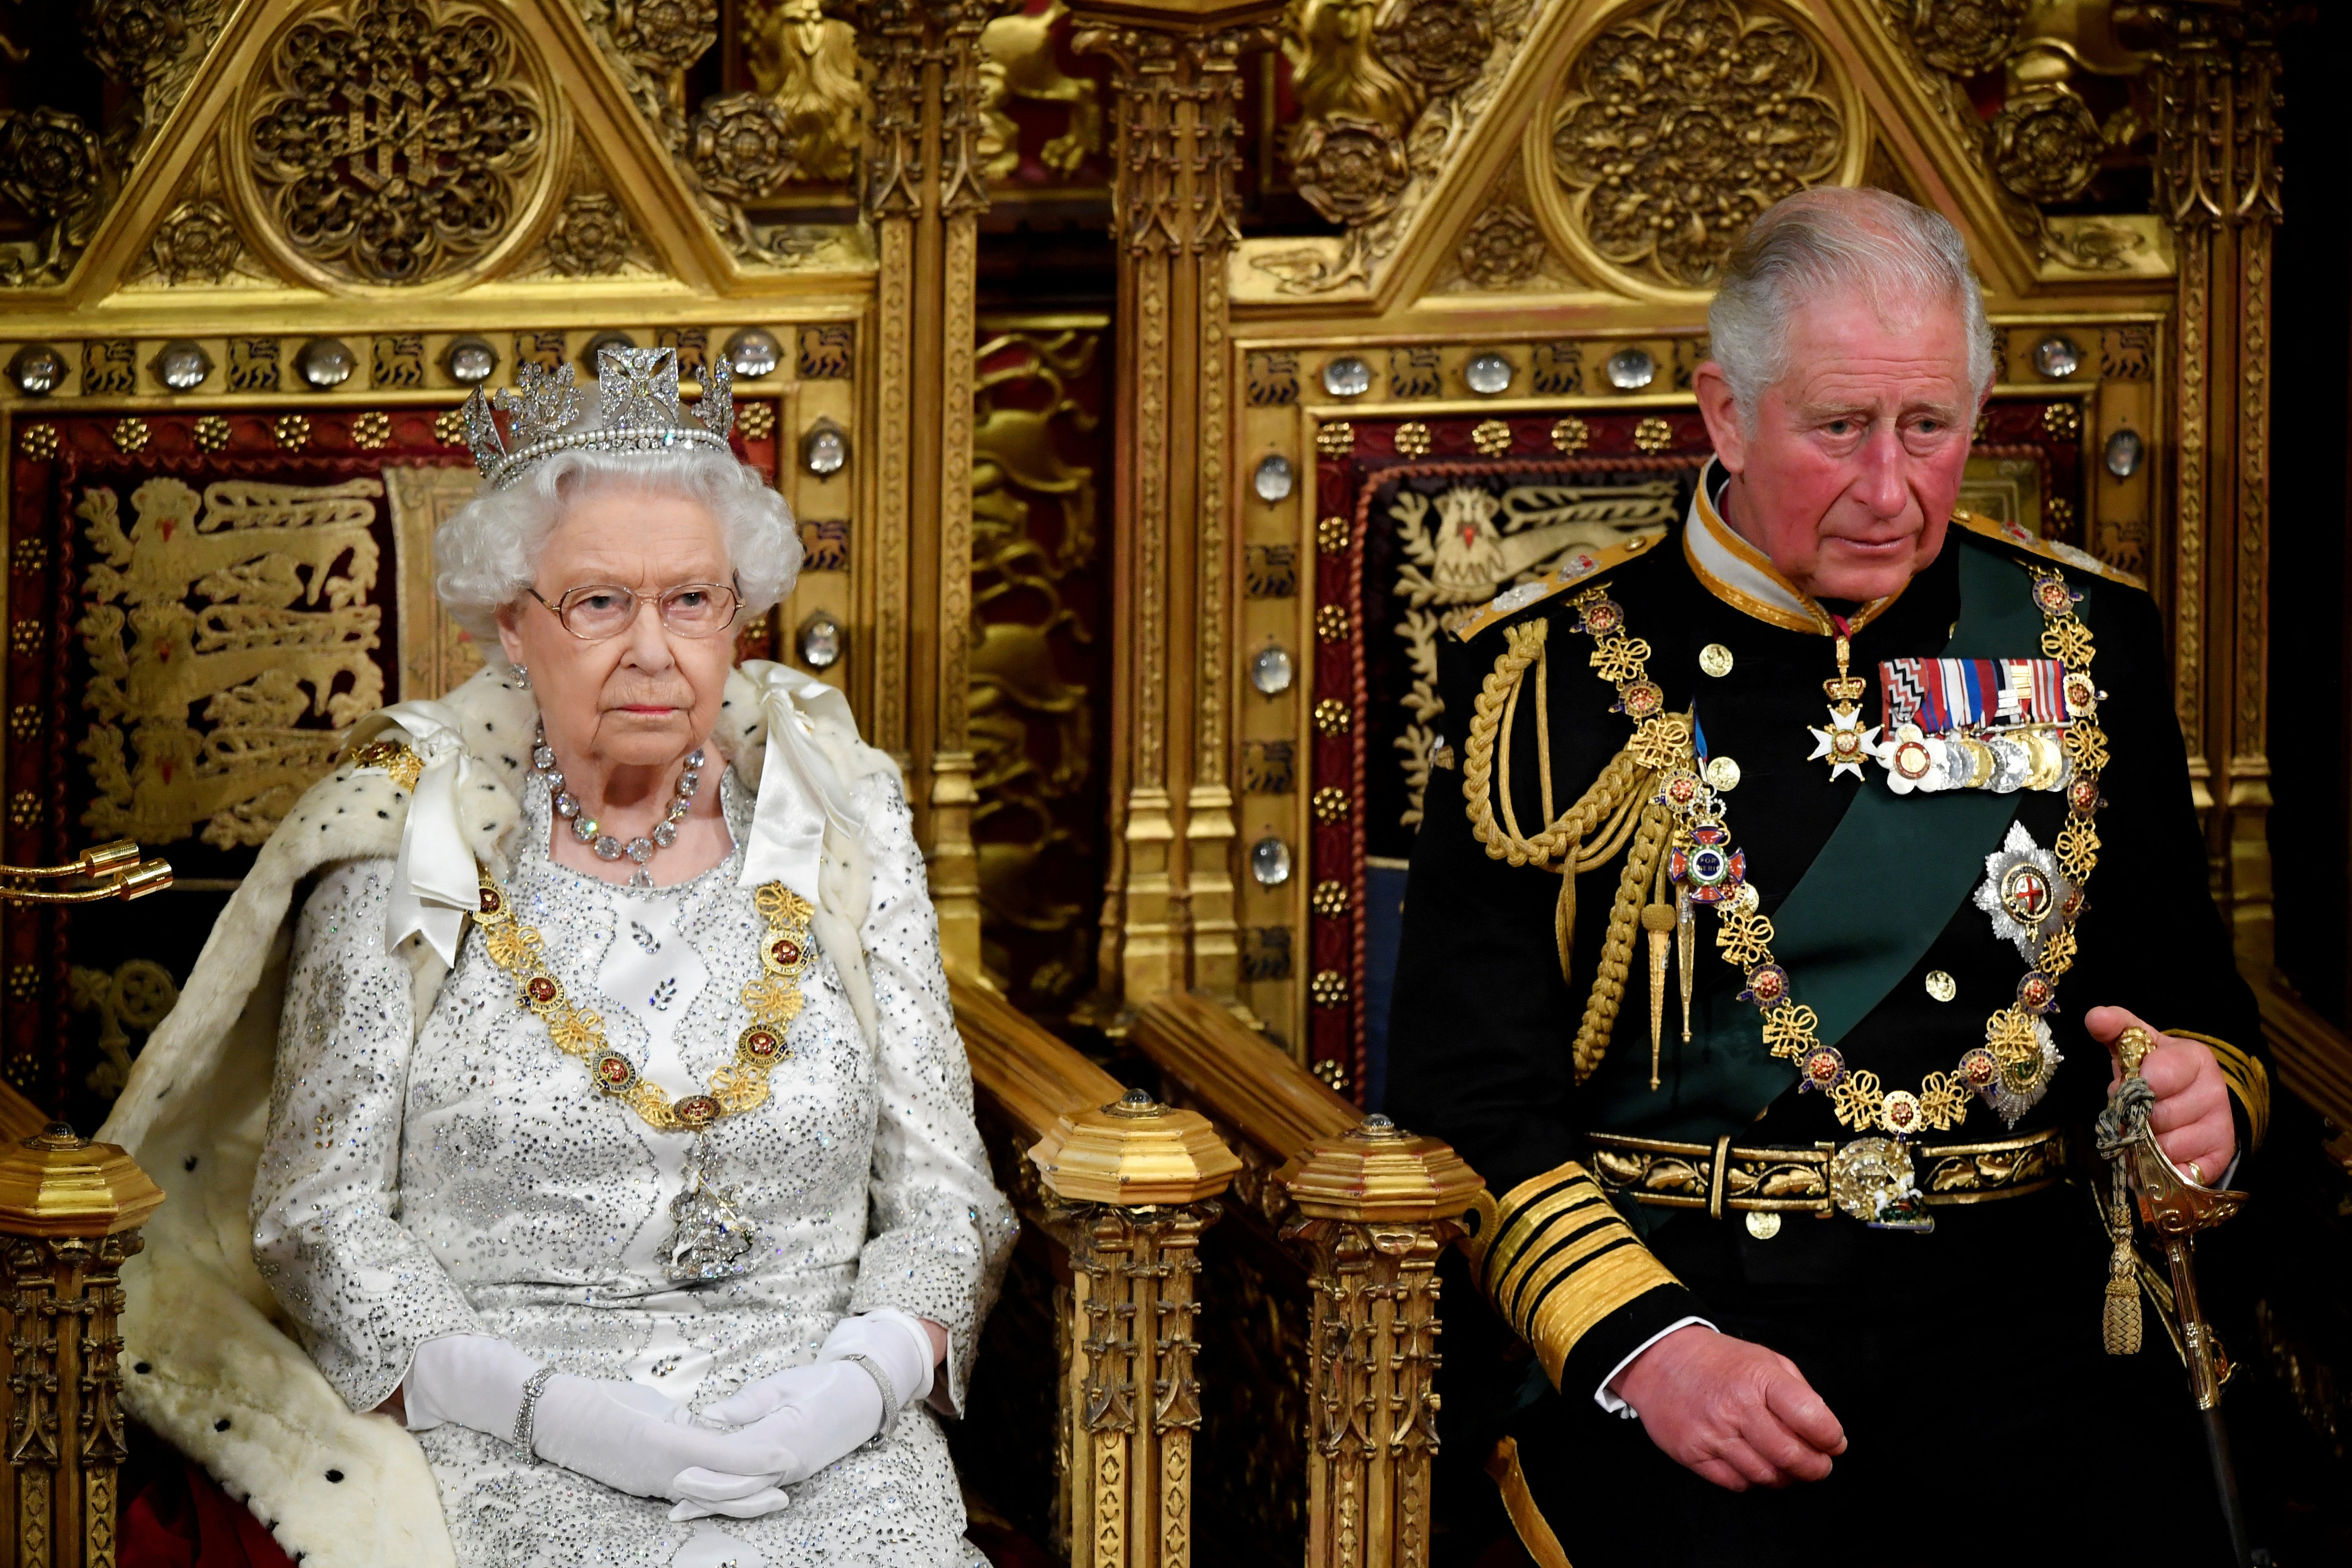 The Queen and the then Duke of Cornwall, who is now King Charles III, in 2019